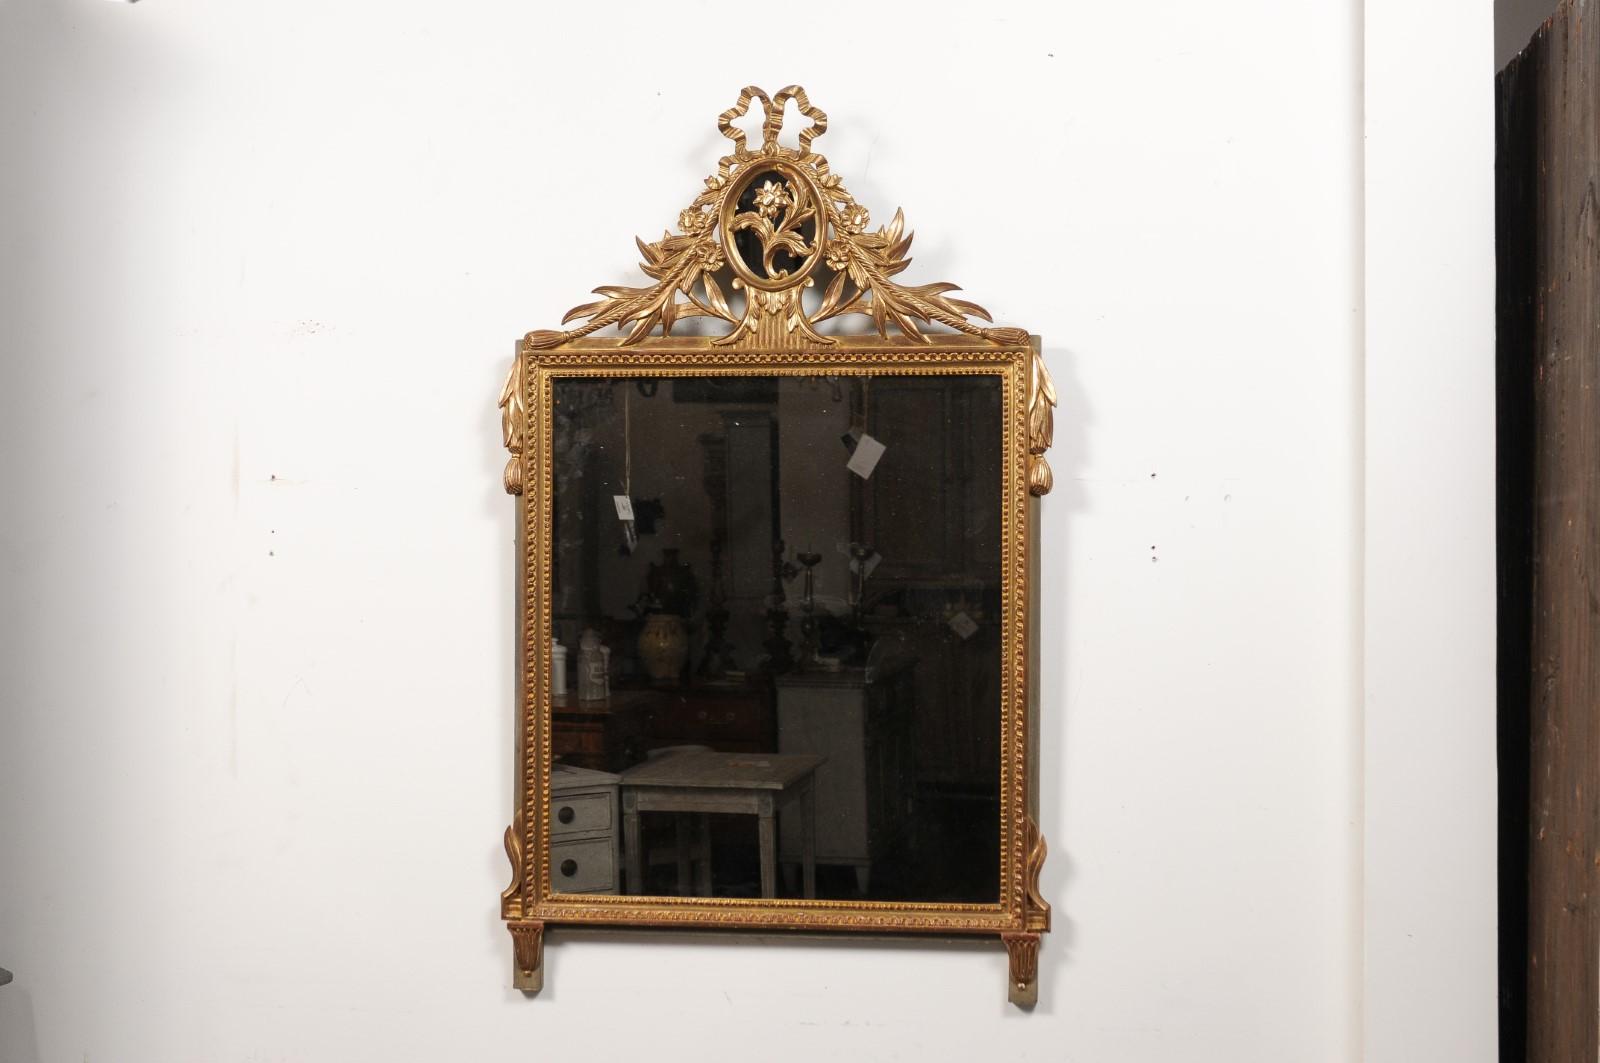 Louis XVI Style Gilt Wood Mirror with Floral Carved Medallion Crest and Tassels For Sale 1